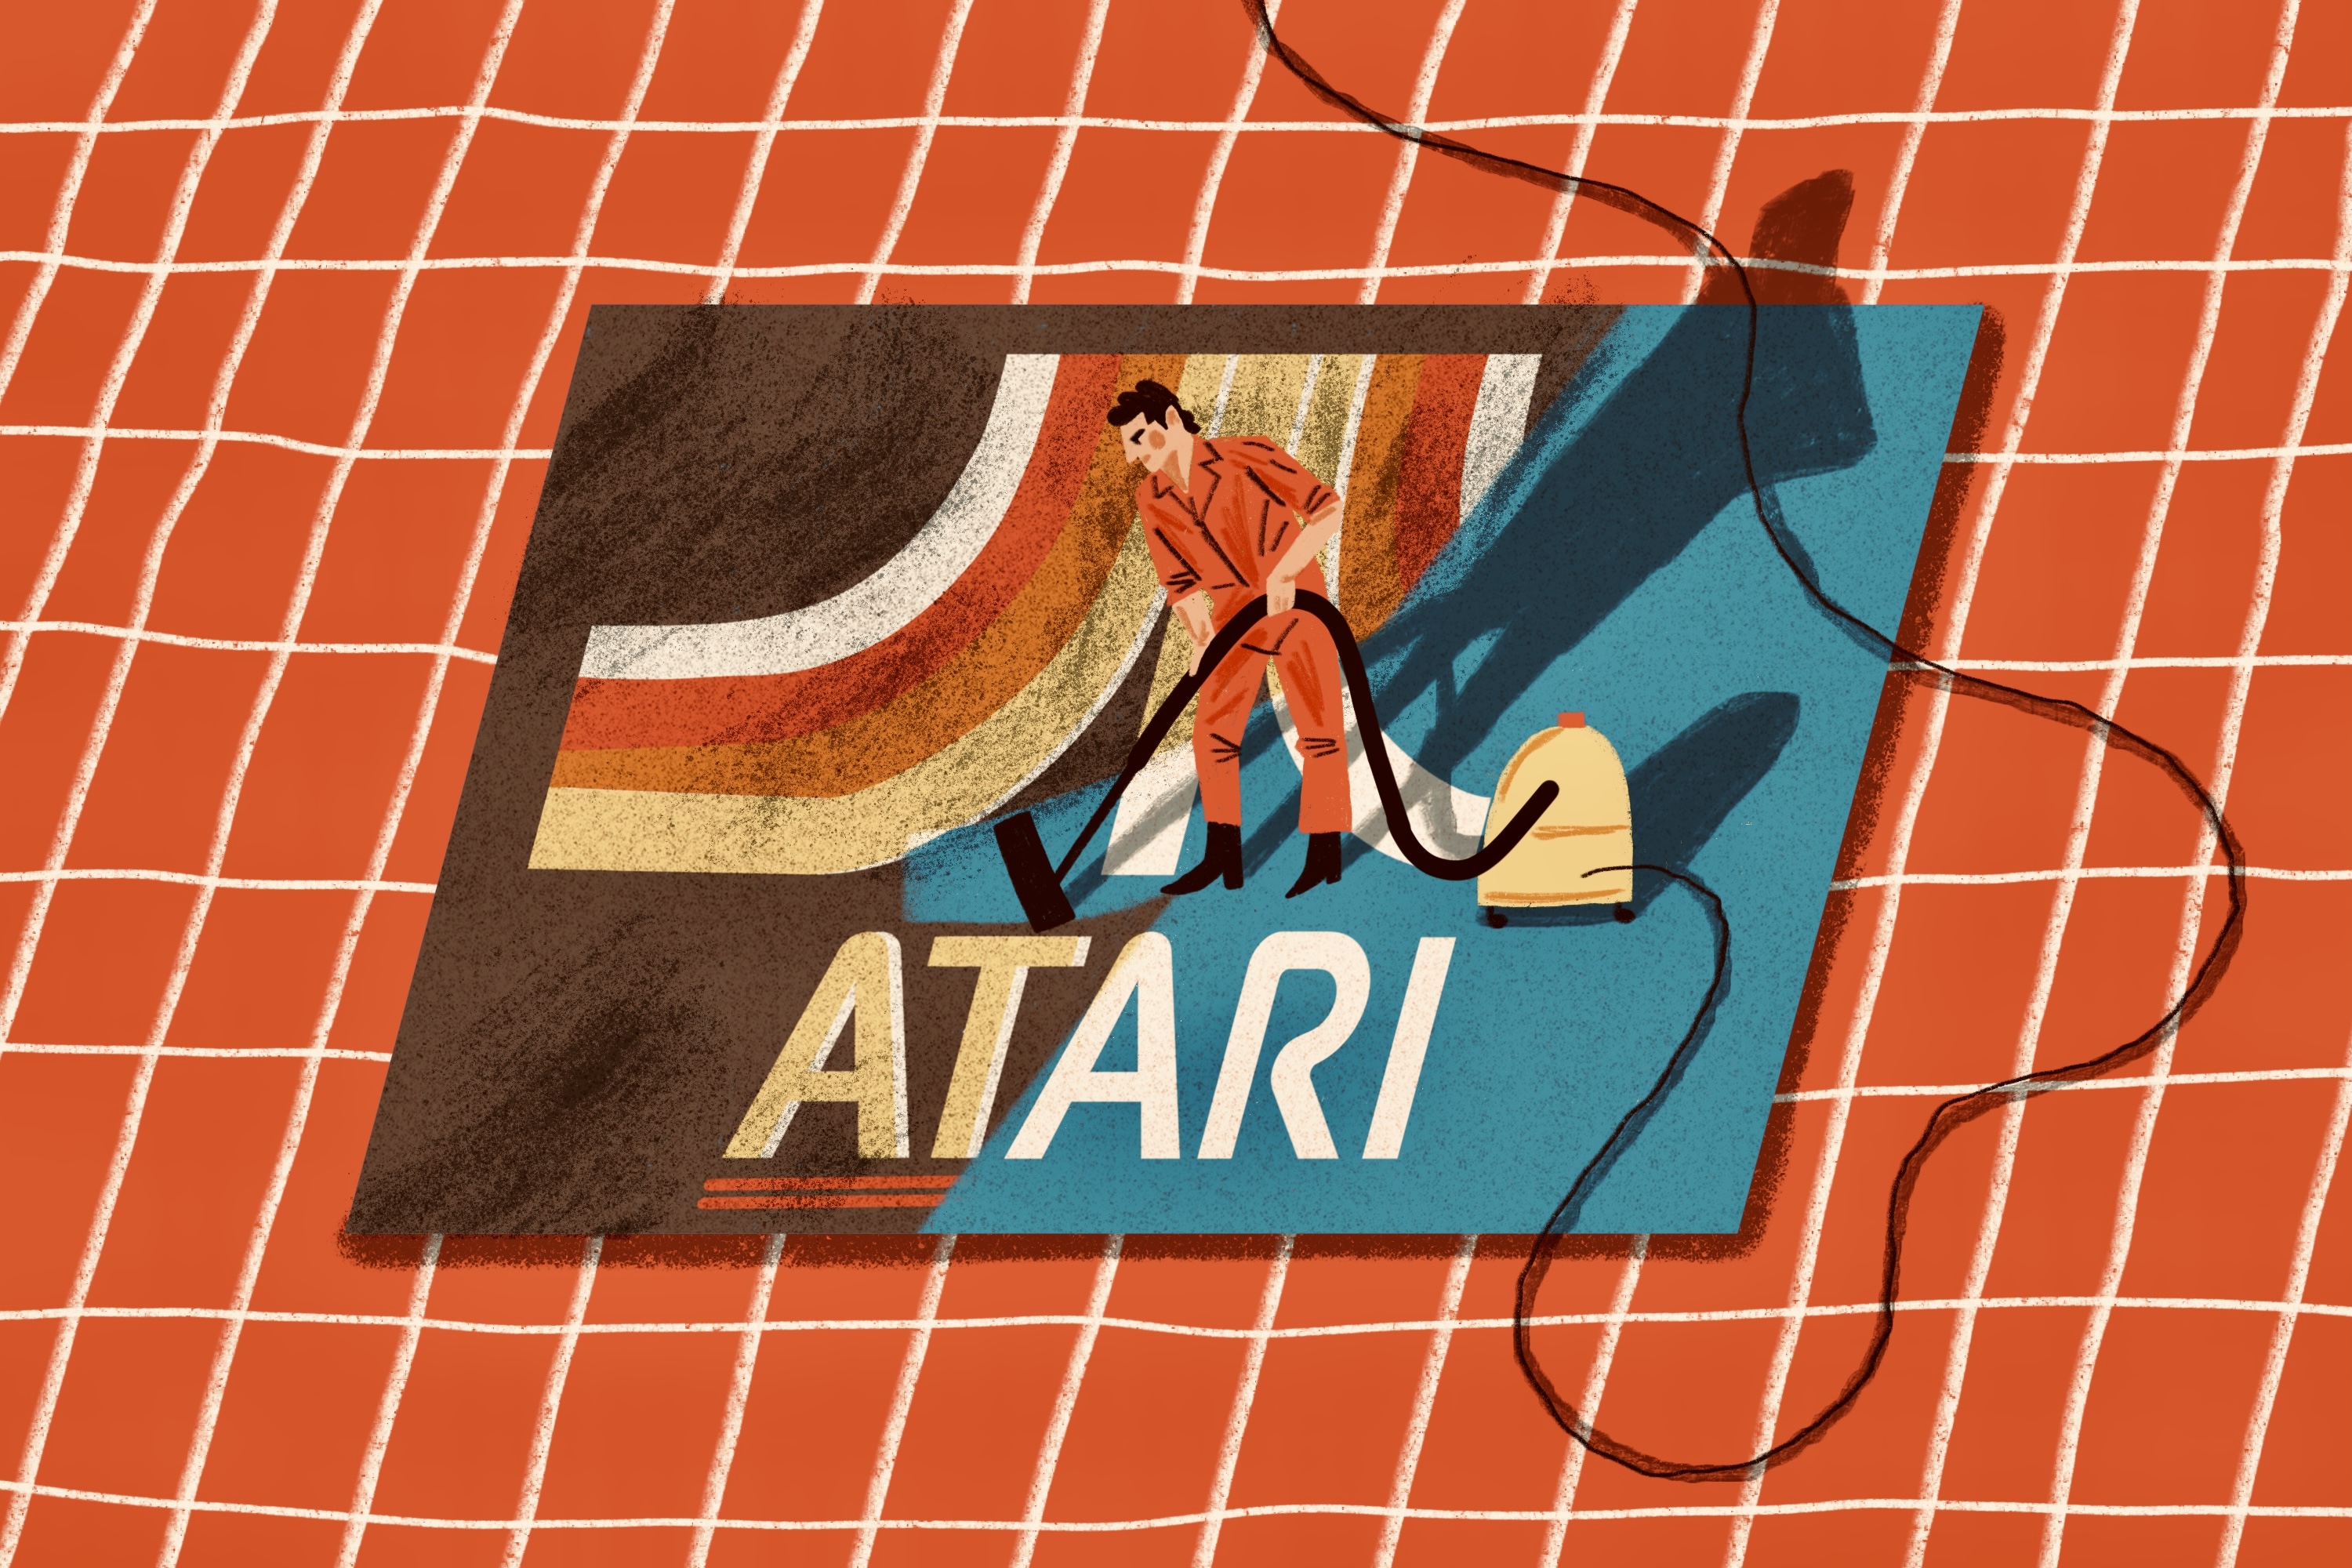 An illustration shows a cleaning person vacuuming an Atari-branded carpet